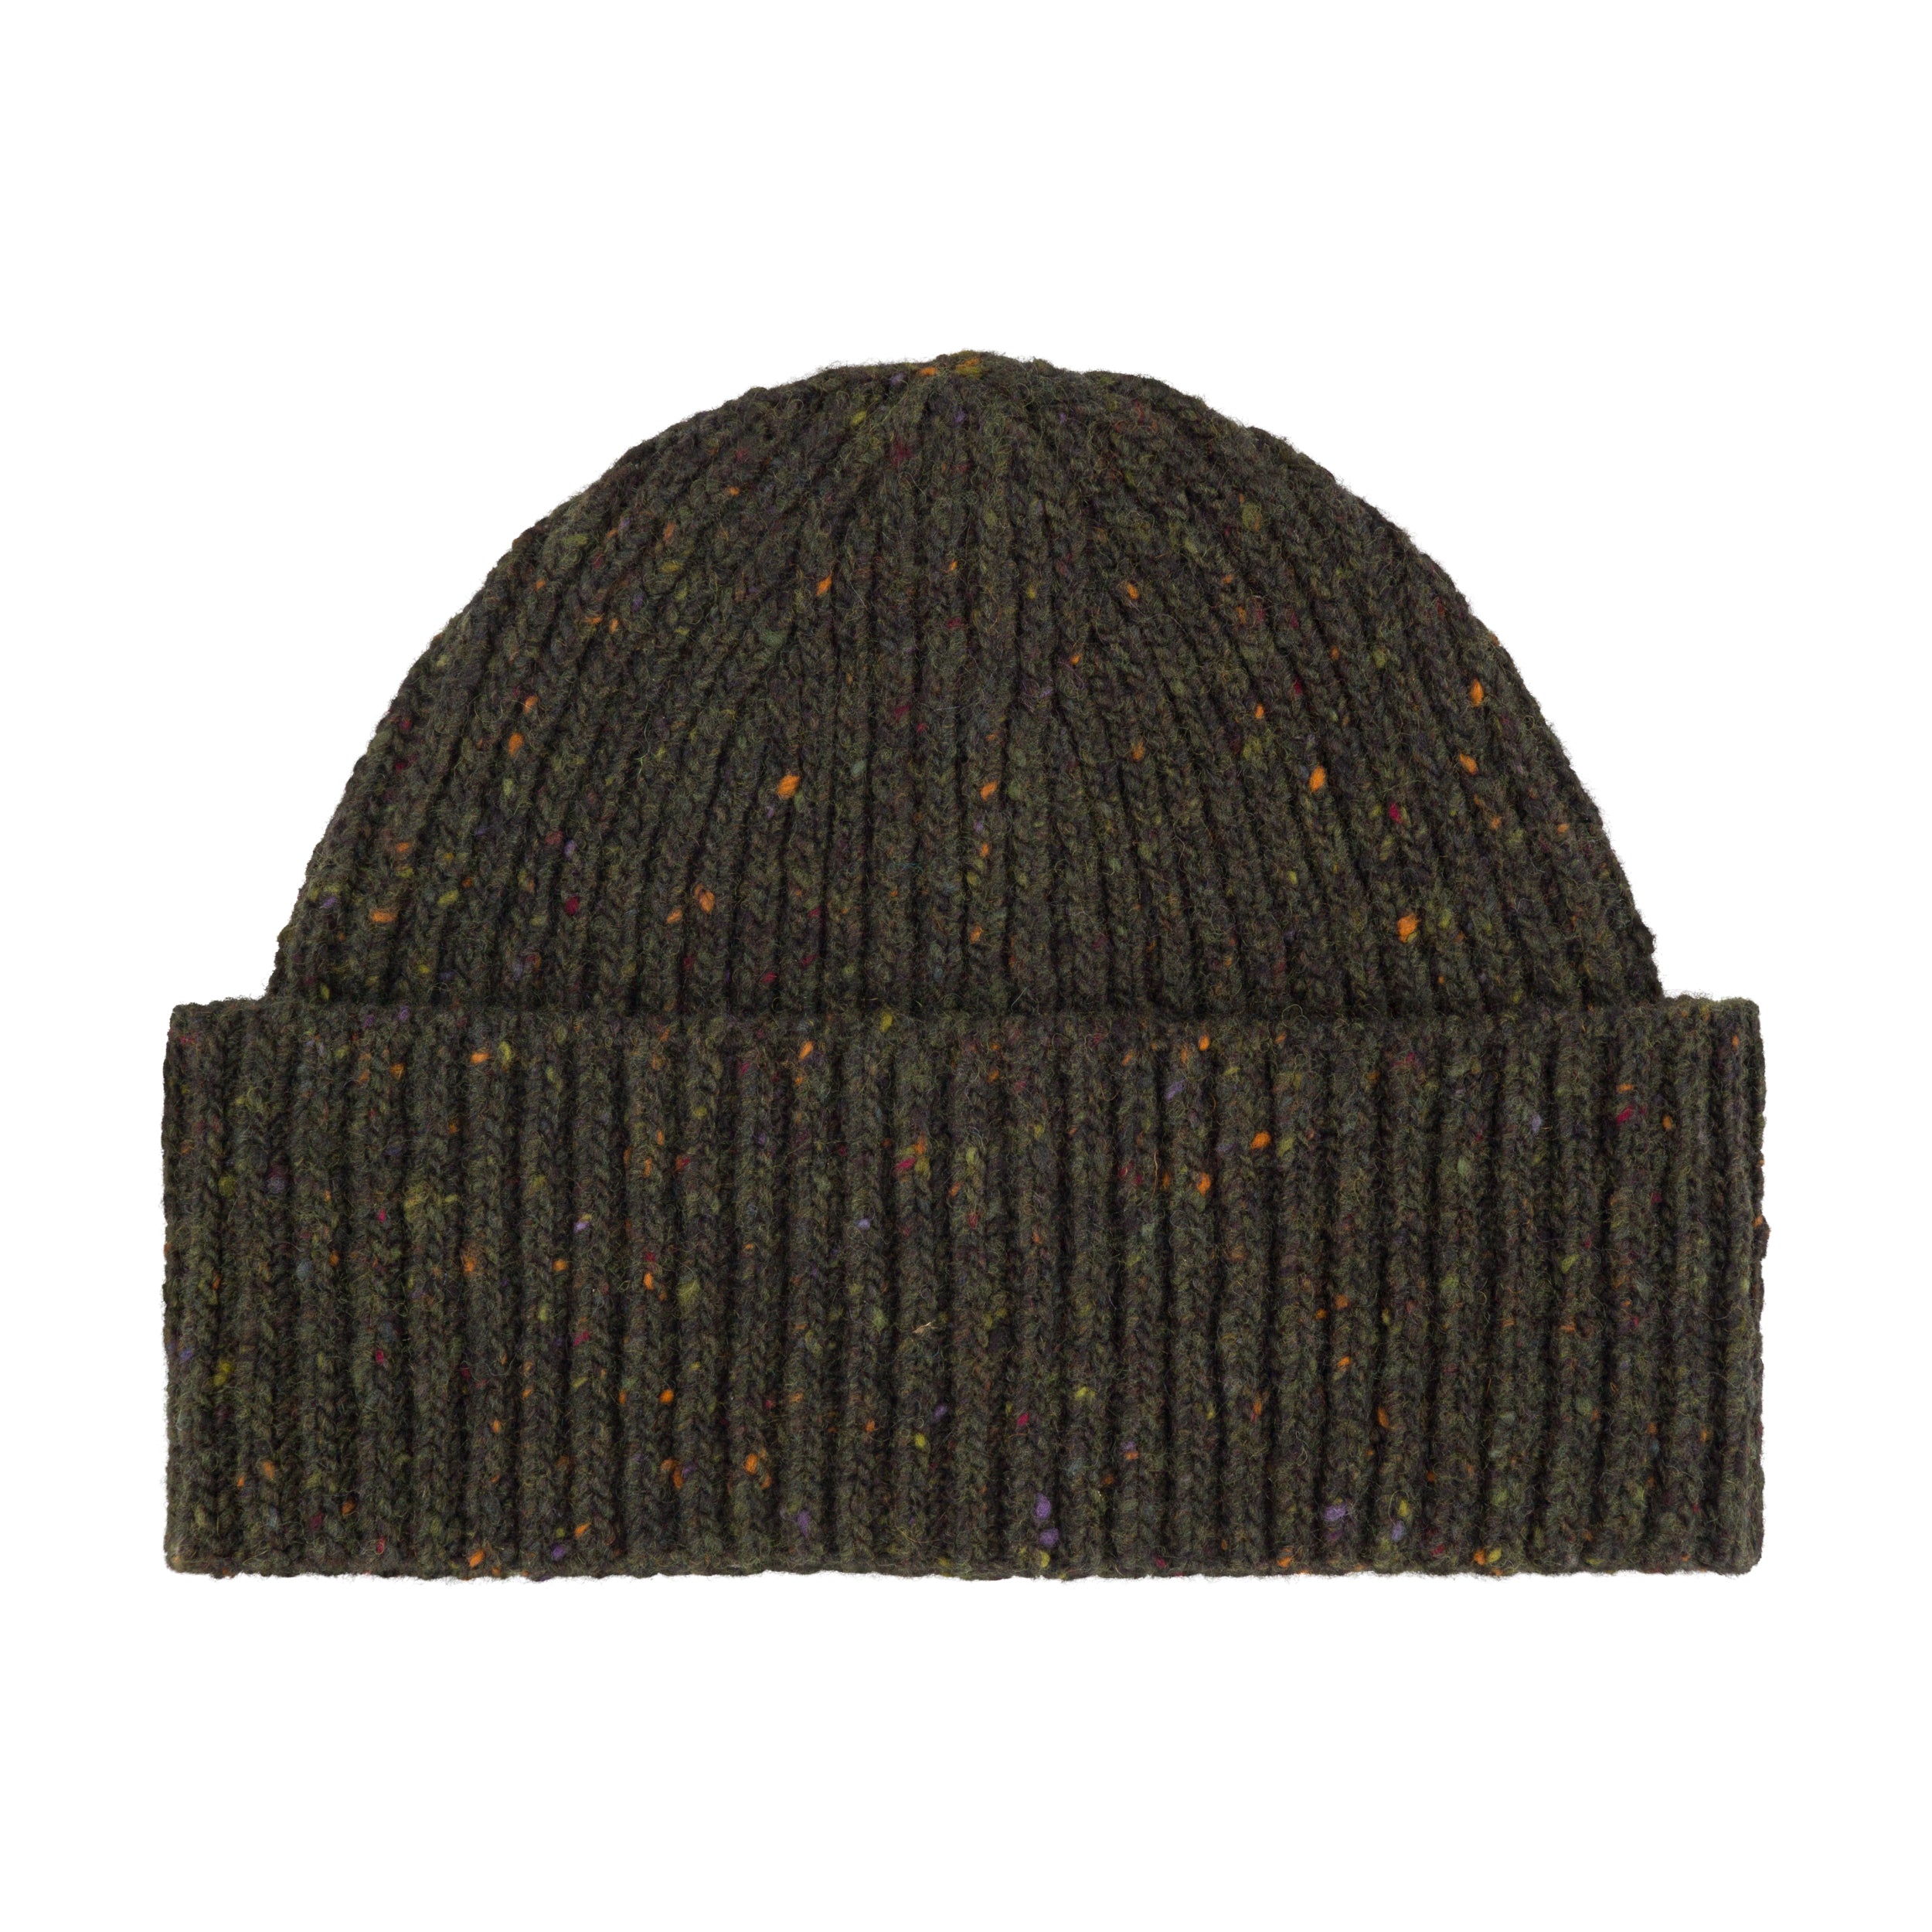 Donegal Wool Hat in Spruce